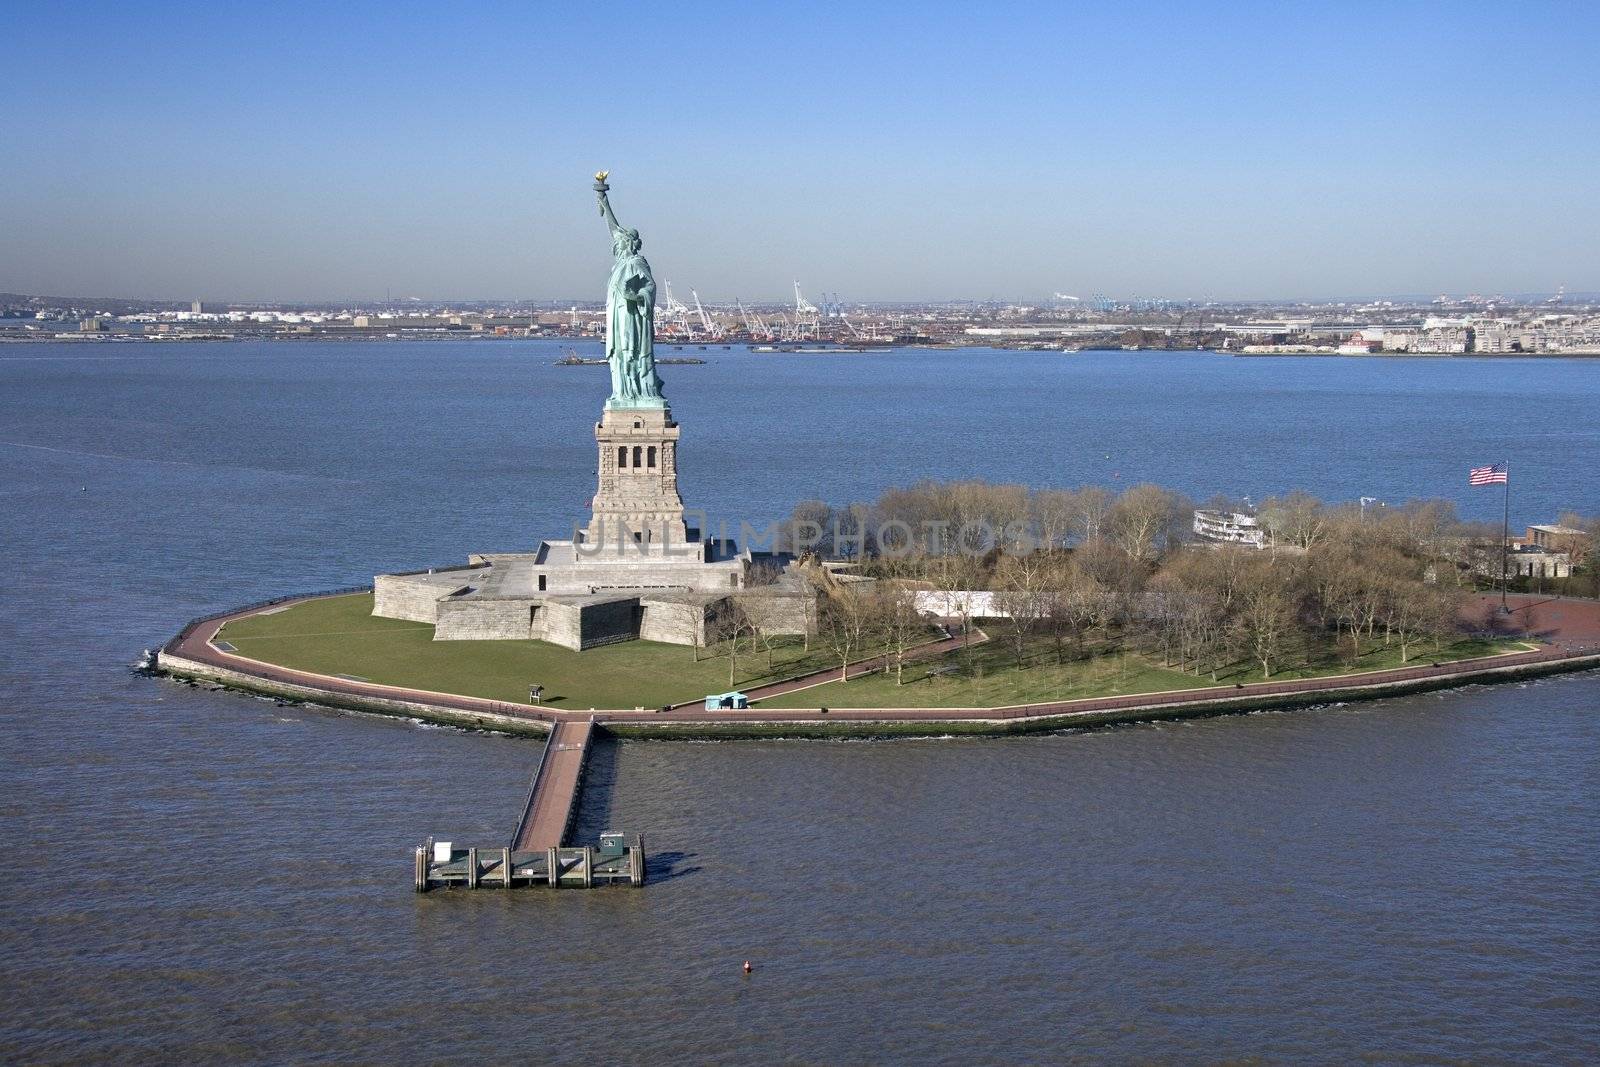 Aerial view of Liberty Island and Statue of Liberty.